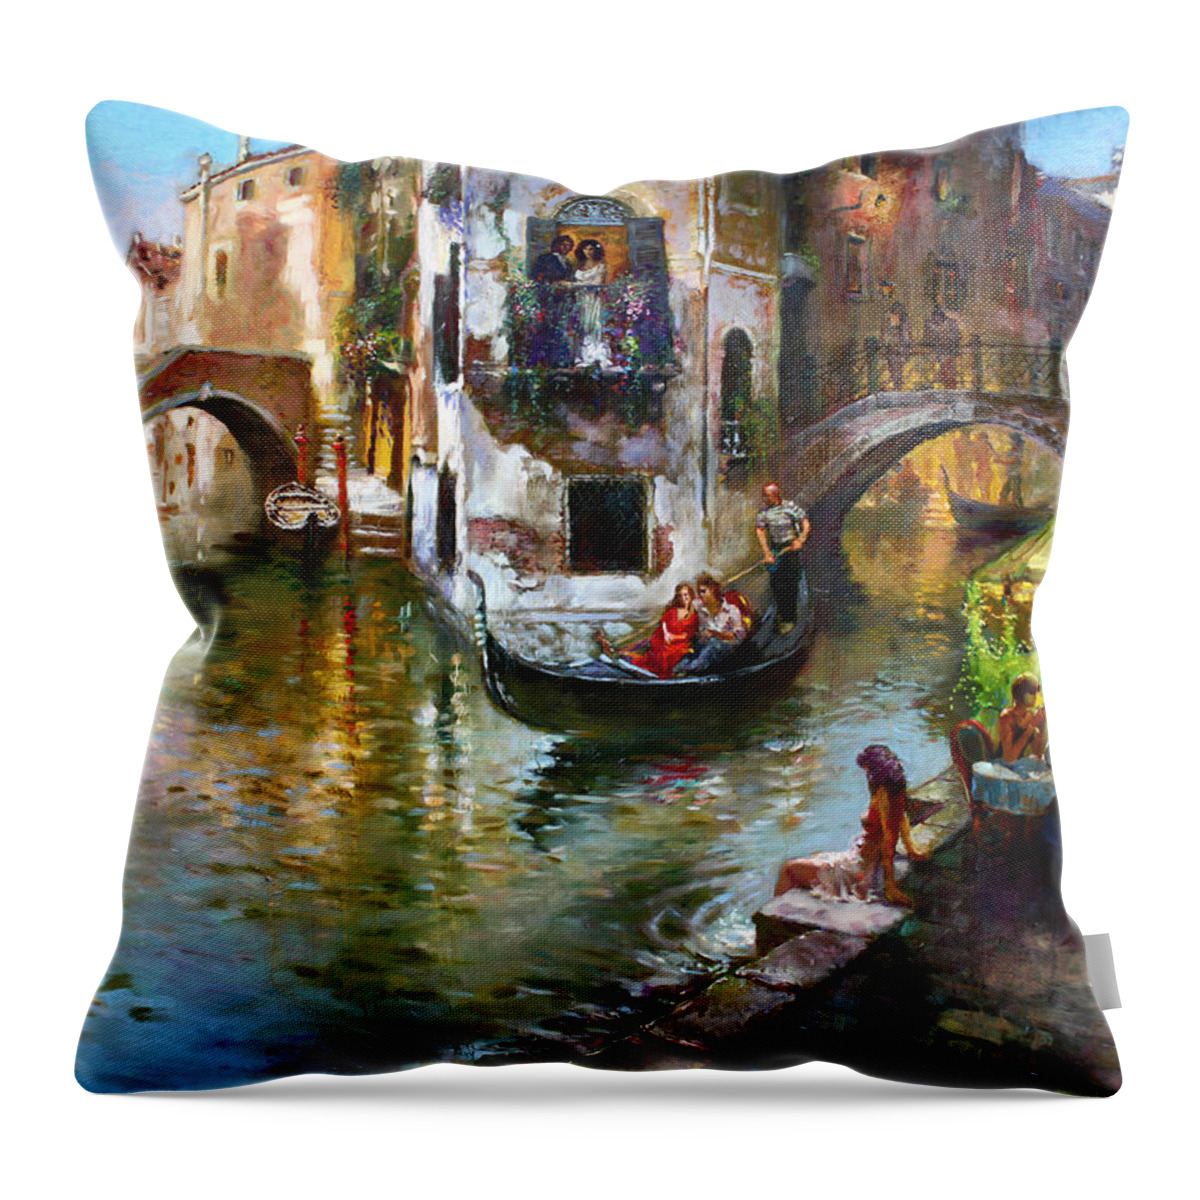 Romance In Venice Throw Pillow featuring the painting Romance in Venice by Ylli Haruni